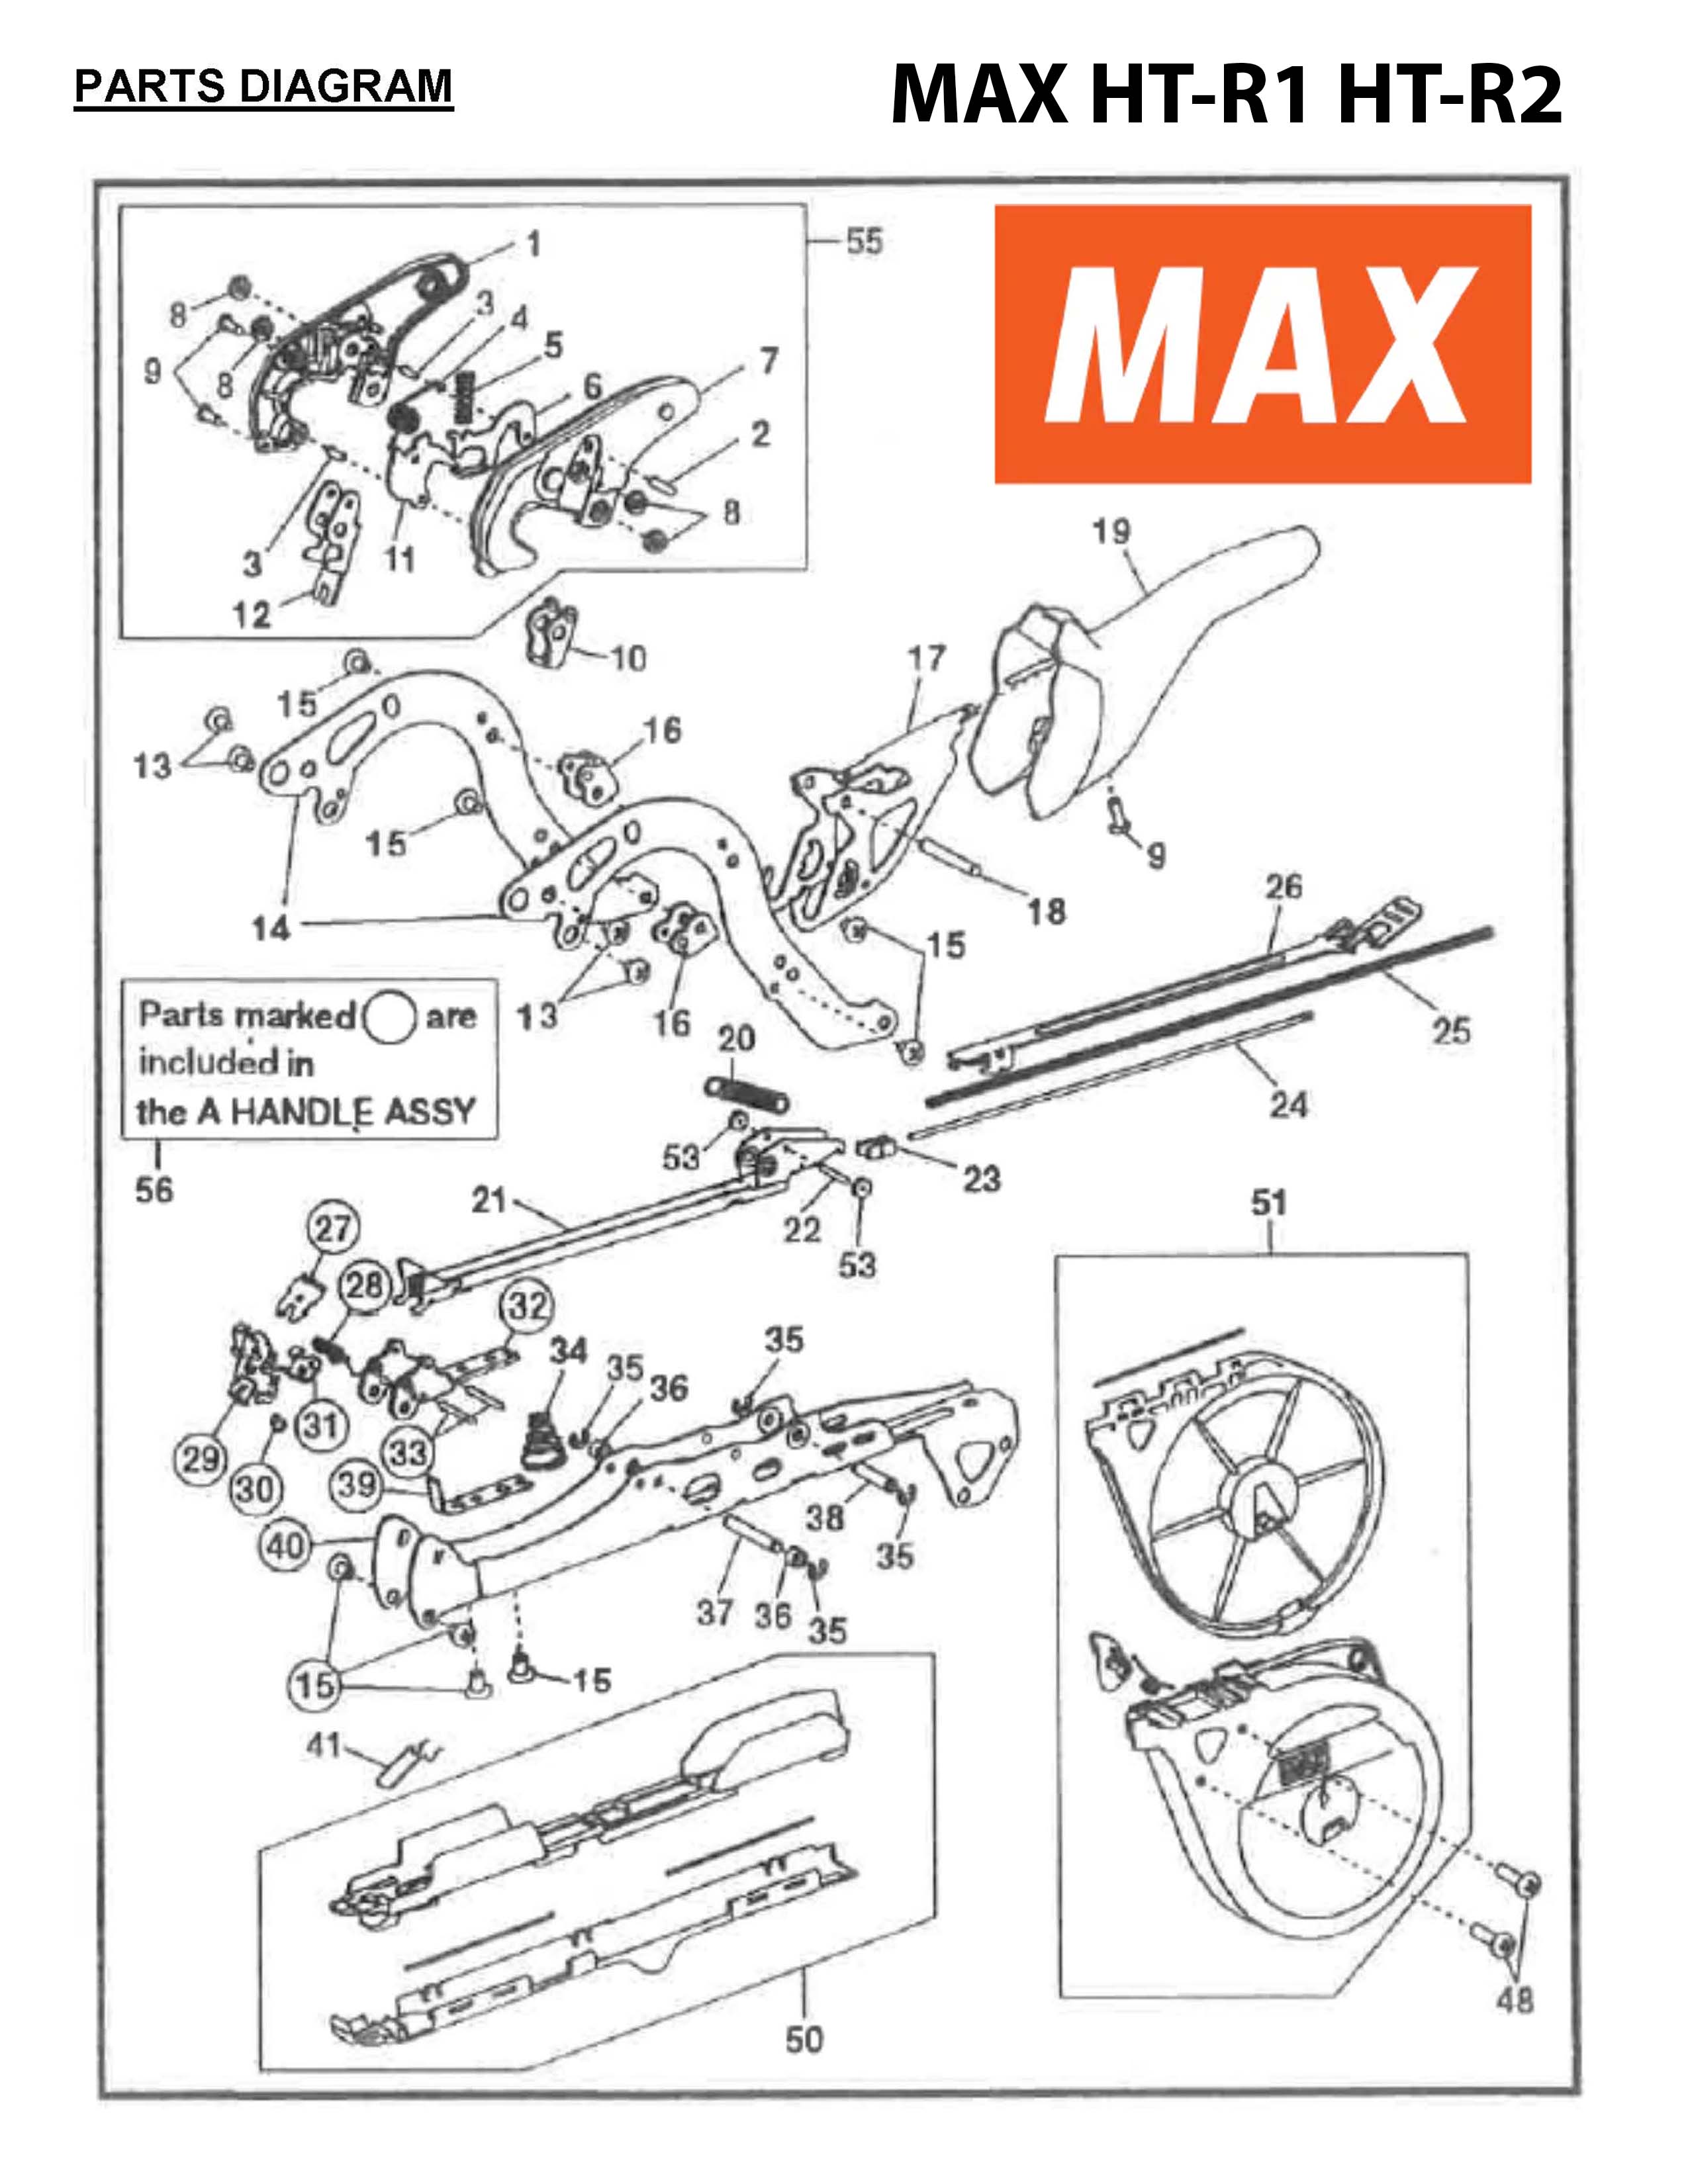 MAX Tapener Part HT11611 PUSHER Fits MAX HT-R1 HT-R2 #23